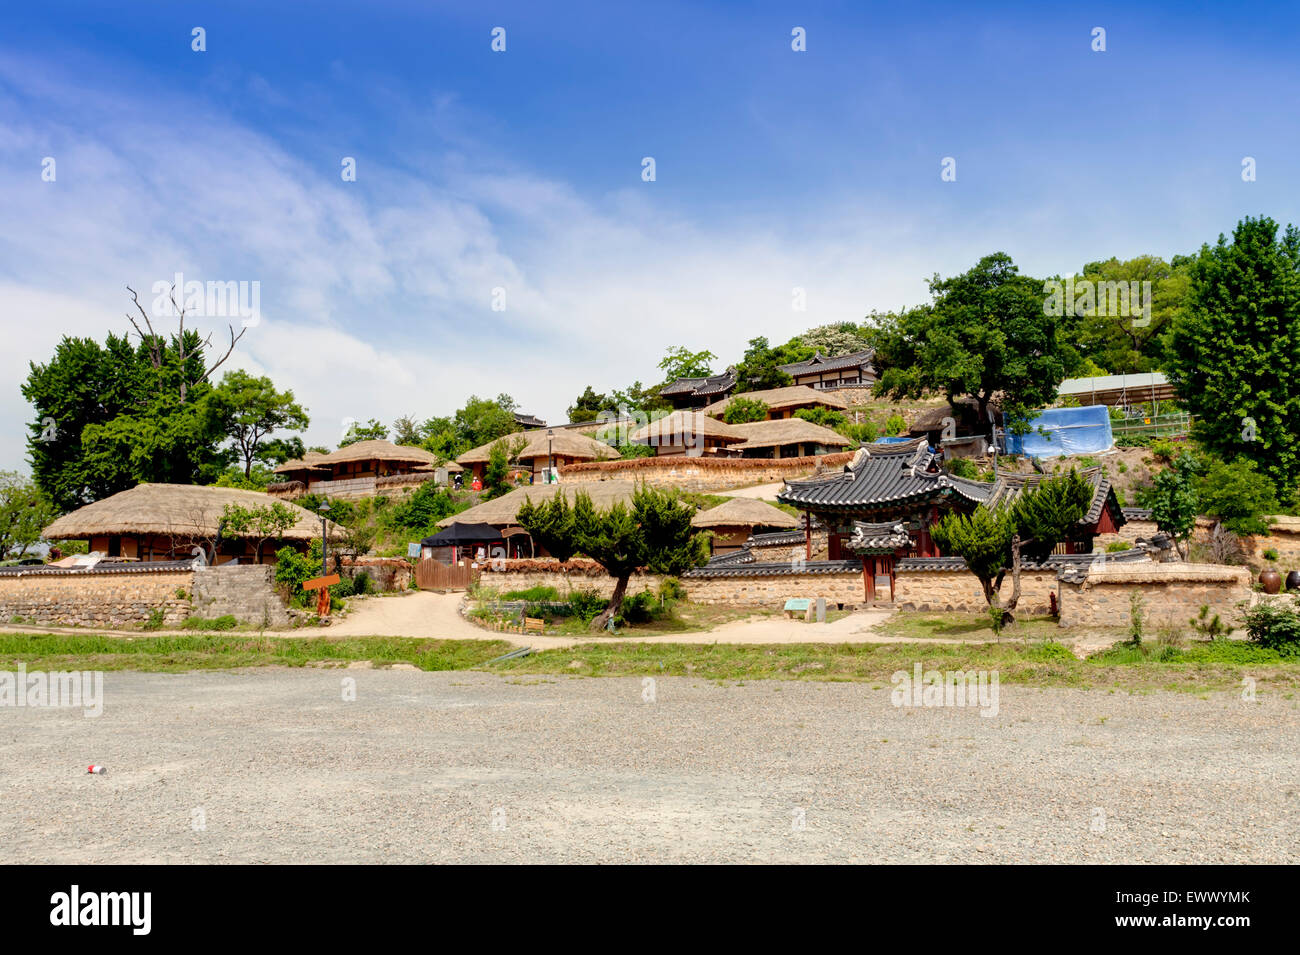 Yangdong traditional village was built in the 14th-15th centuries  located at Gyeongju, South Korea. Stock Photo